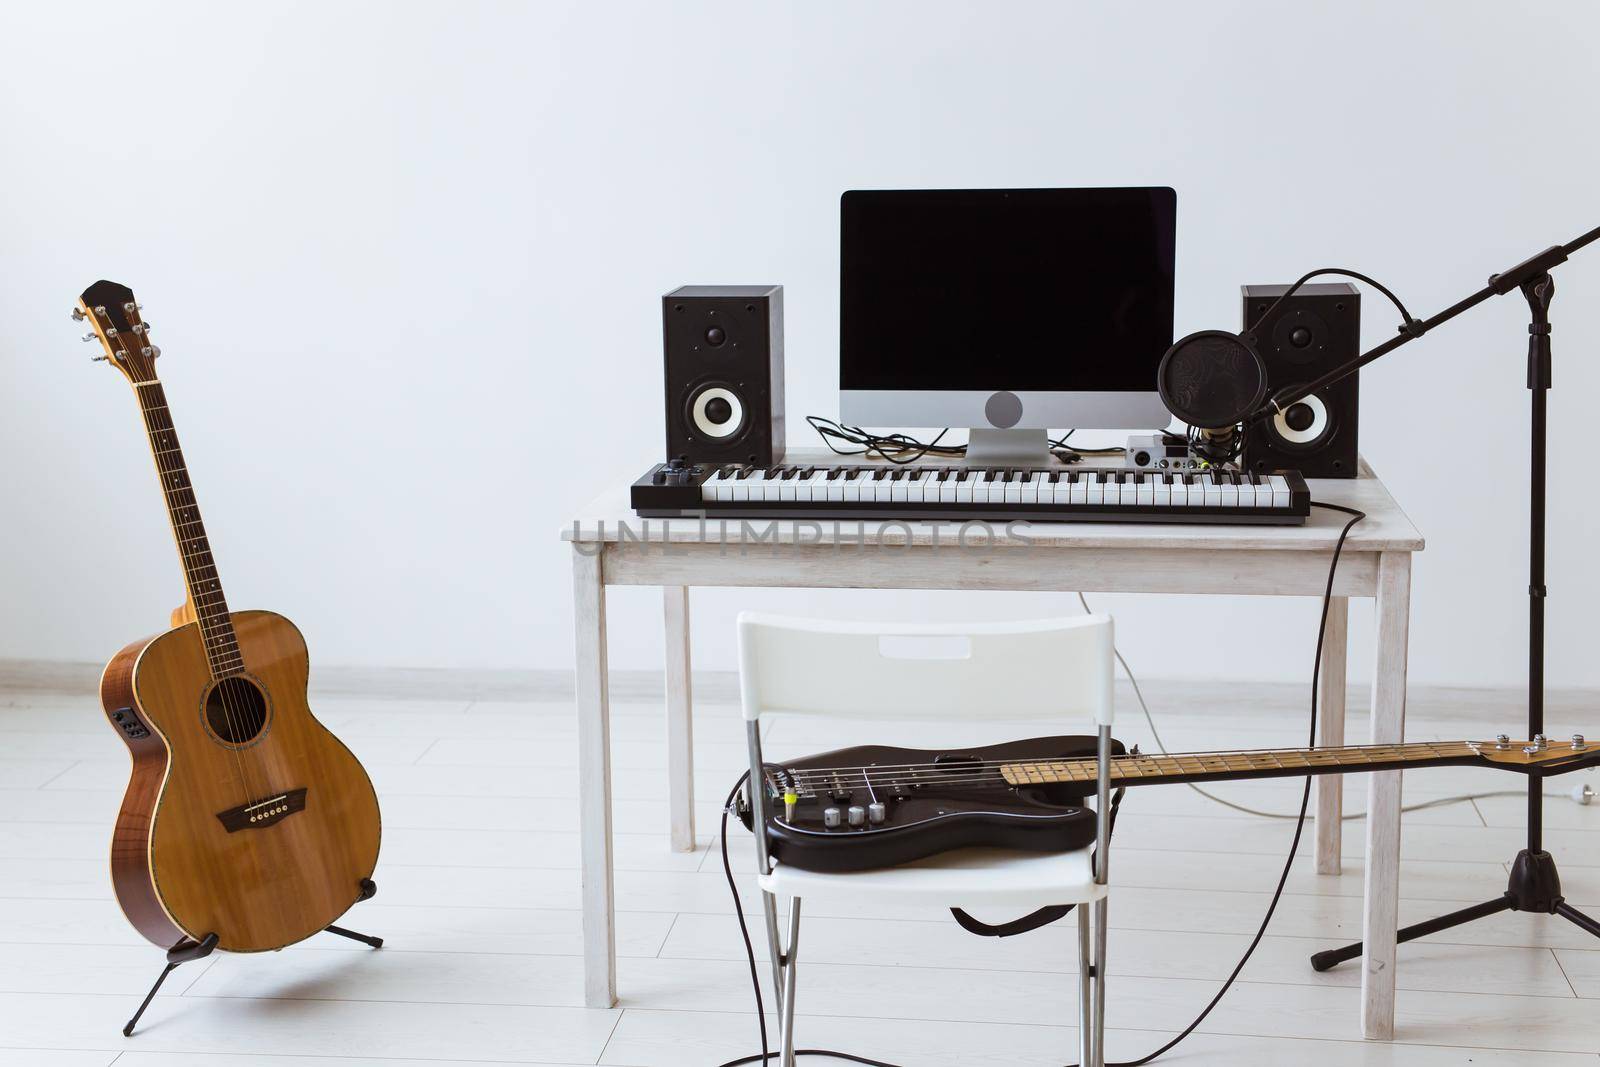 Microphone, computer and musical equipment guitars and piano background. Home recording studio concept. by Satura86